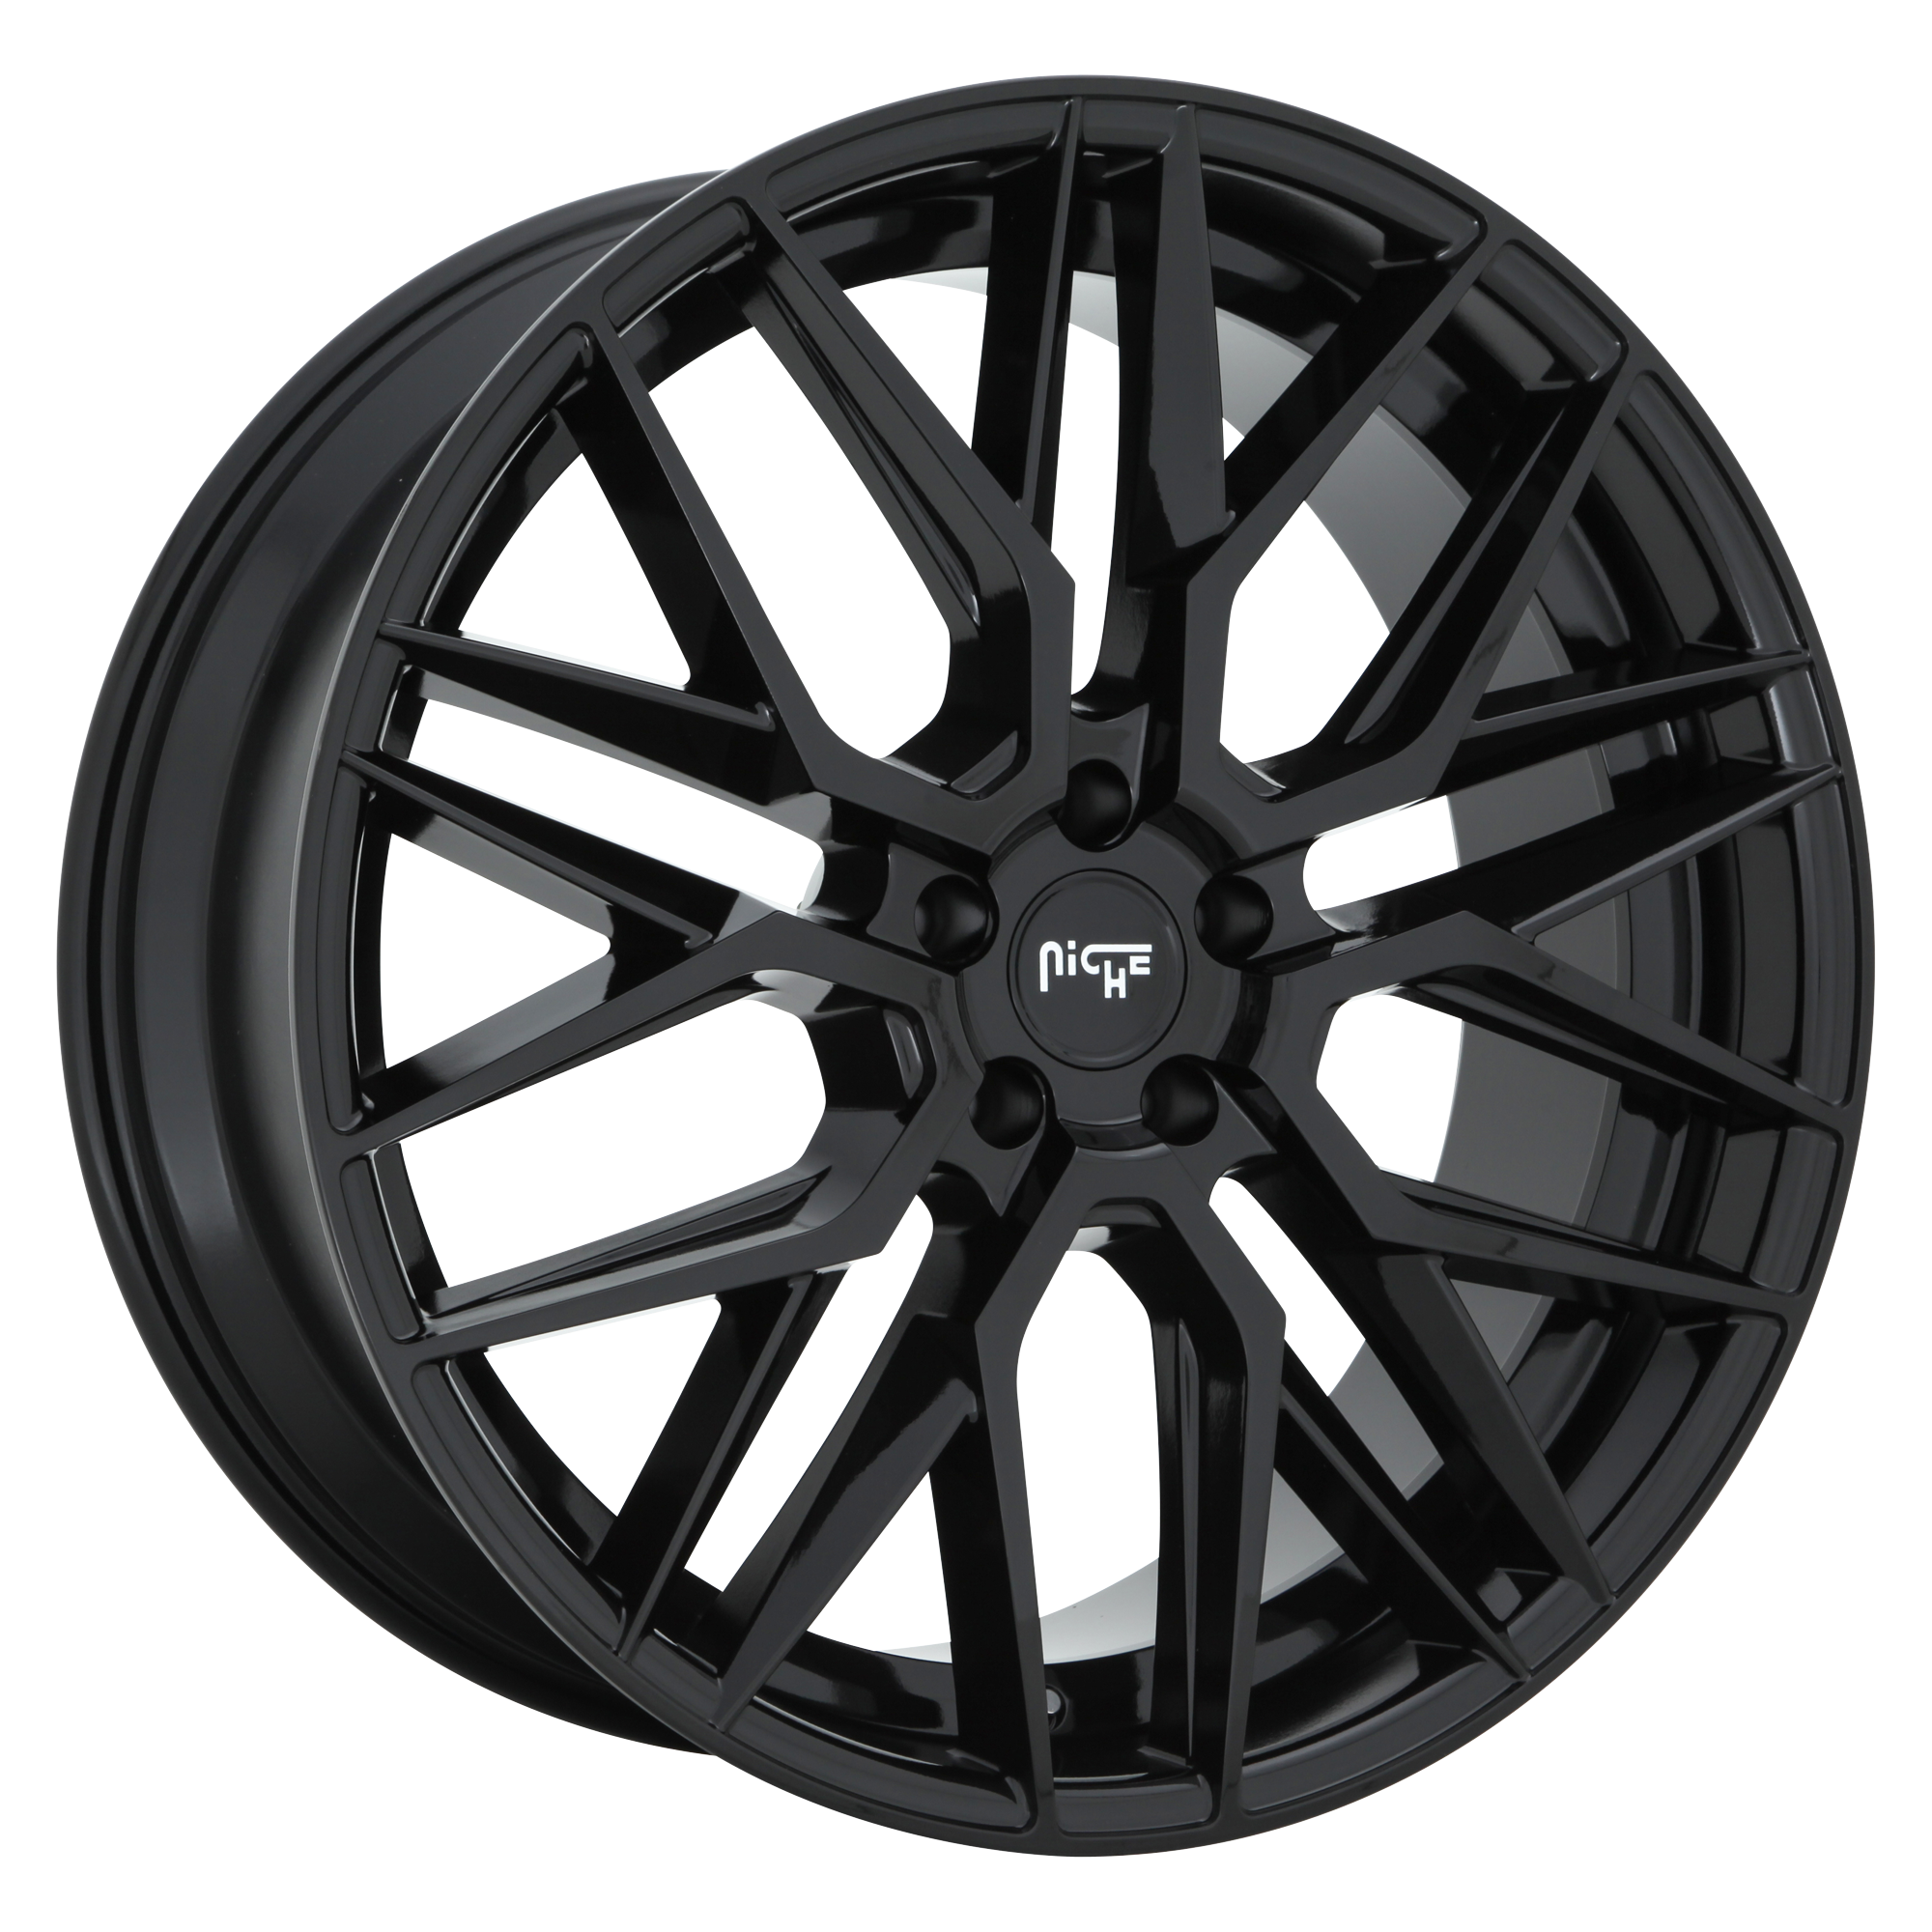 GAMMA 20x9 5x115.00 GLOSS BLACK (18 mm) - Tires and Engine Performance